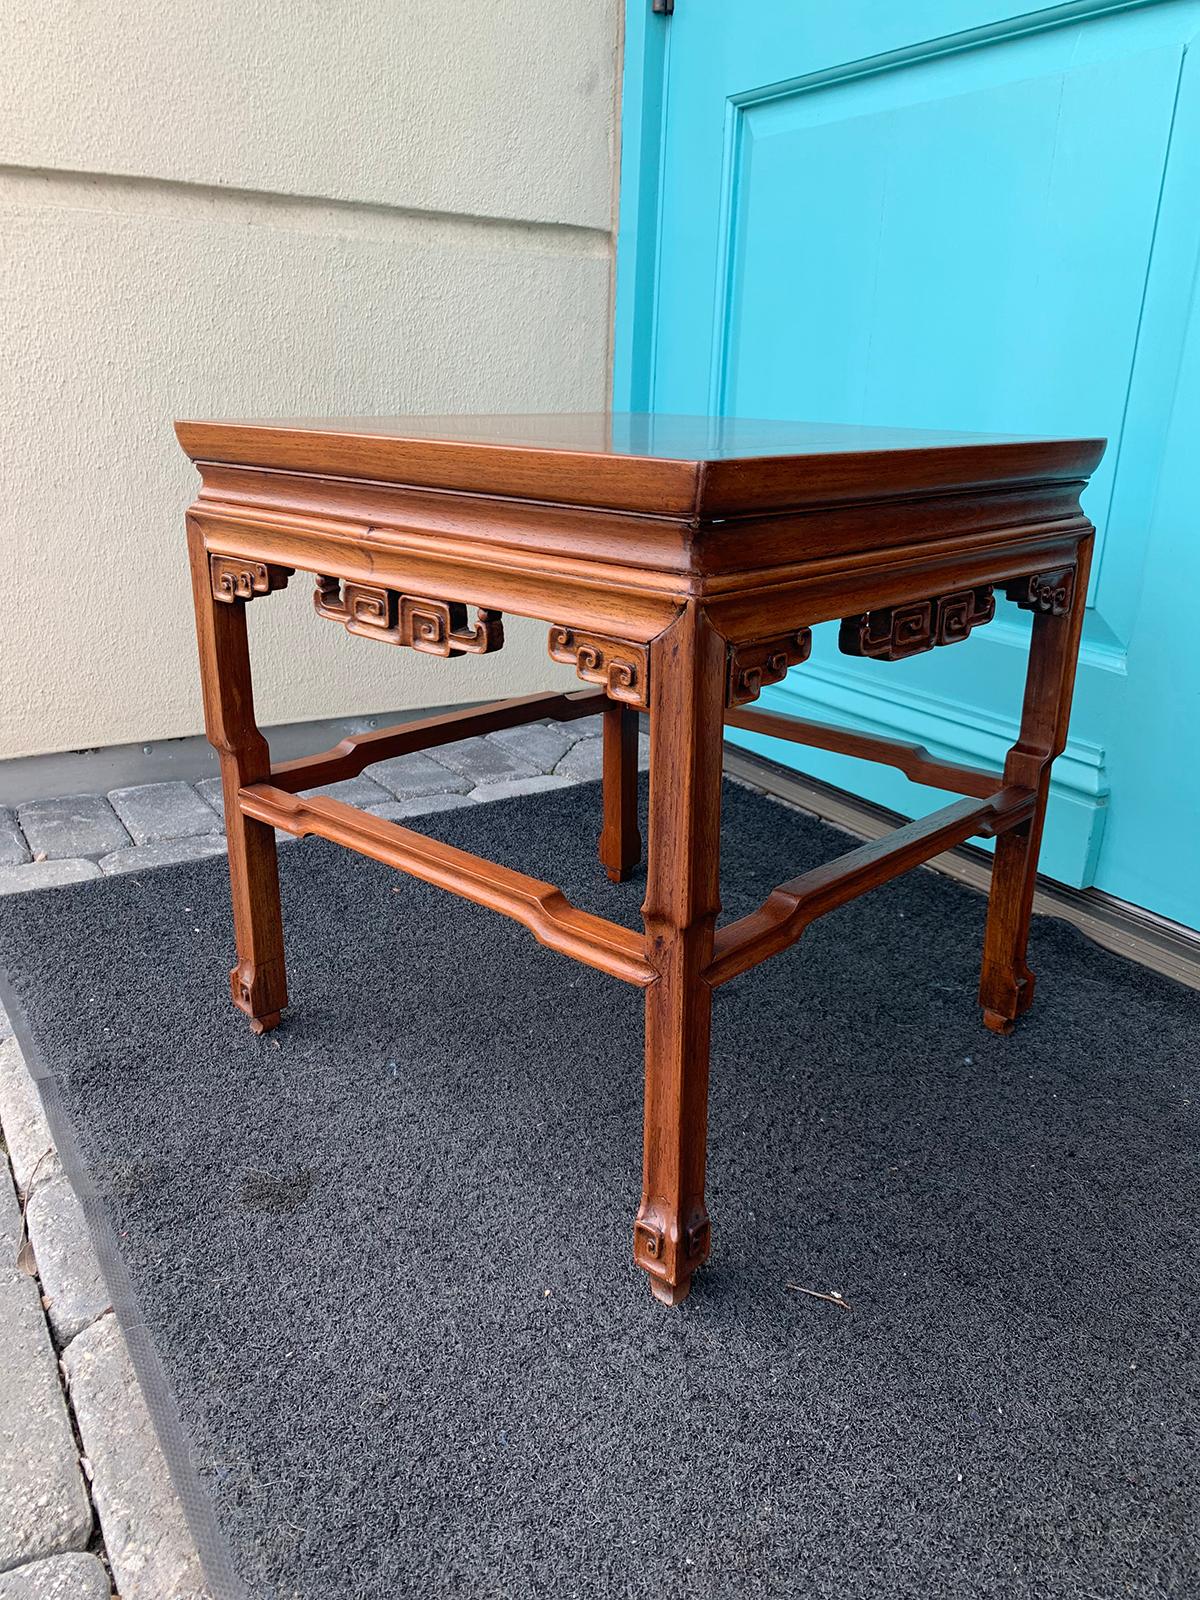 Small 19th Century Chinese Square Drinks or Coffee Table In Good Condition For Sale In Atlanta, GA